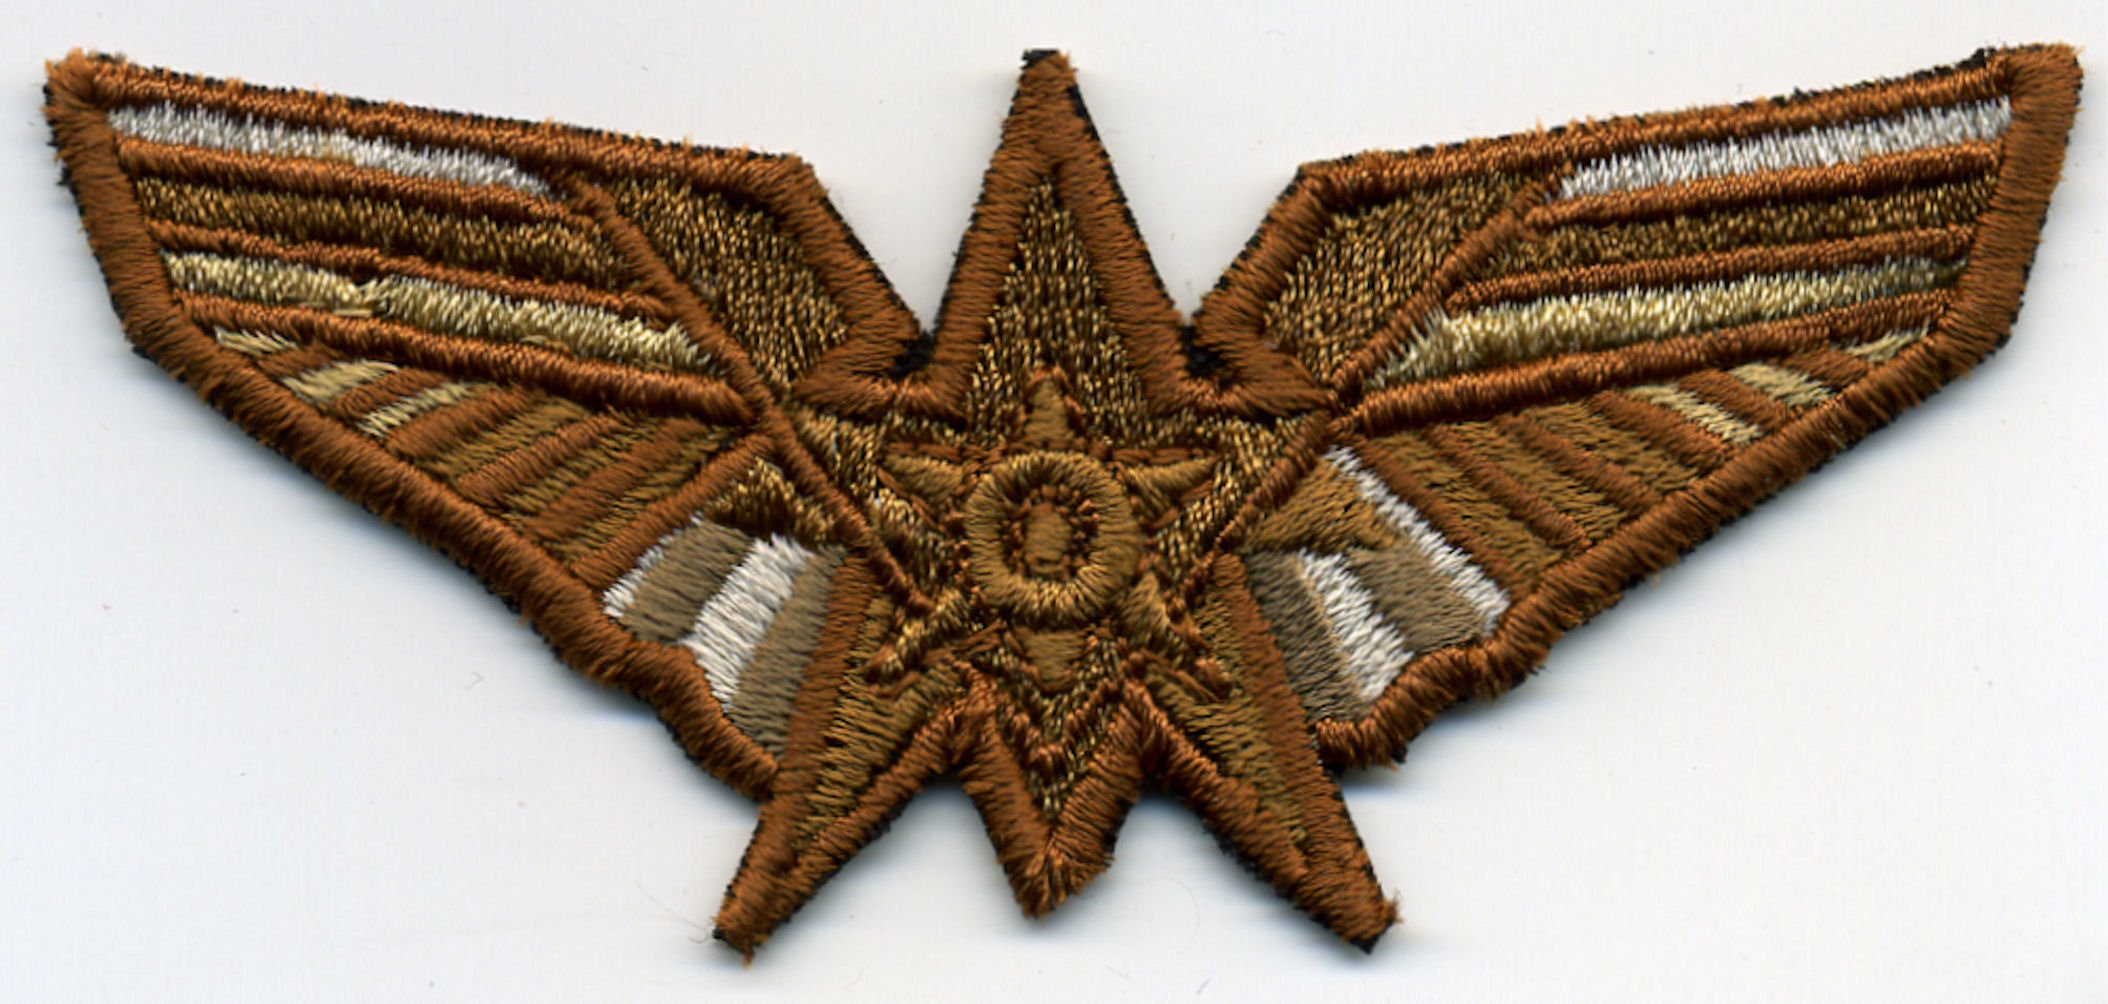 Starship Troopers Fed Net Fully Embroidered Iron on Patch 